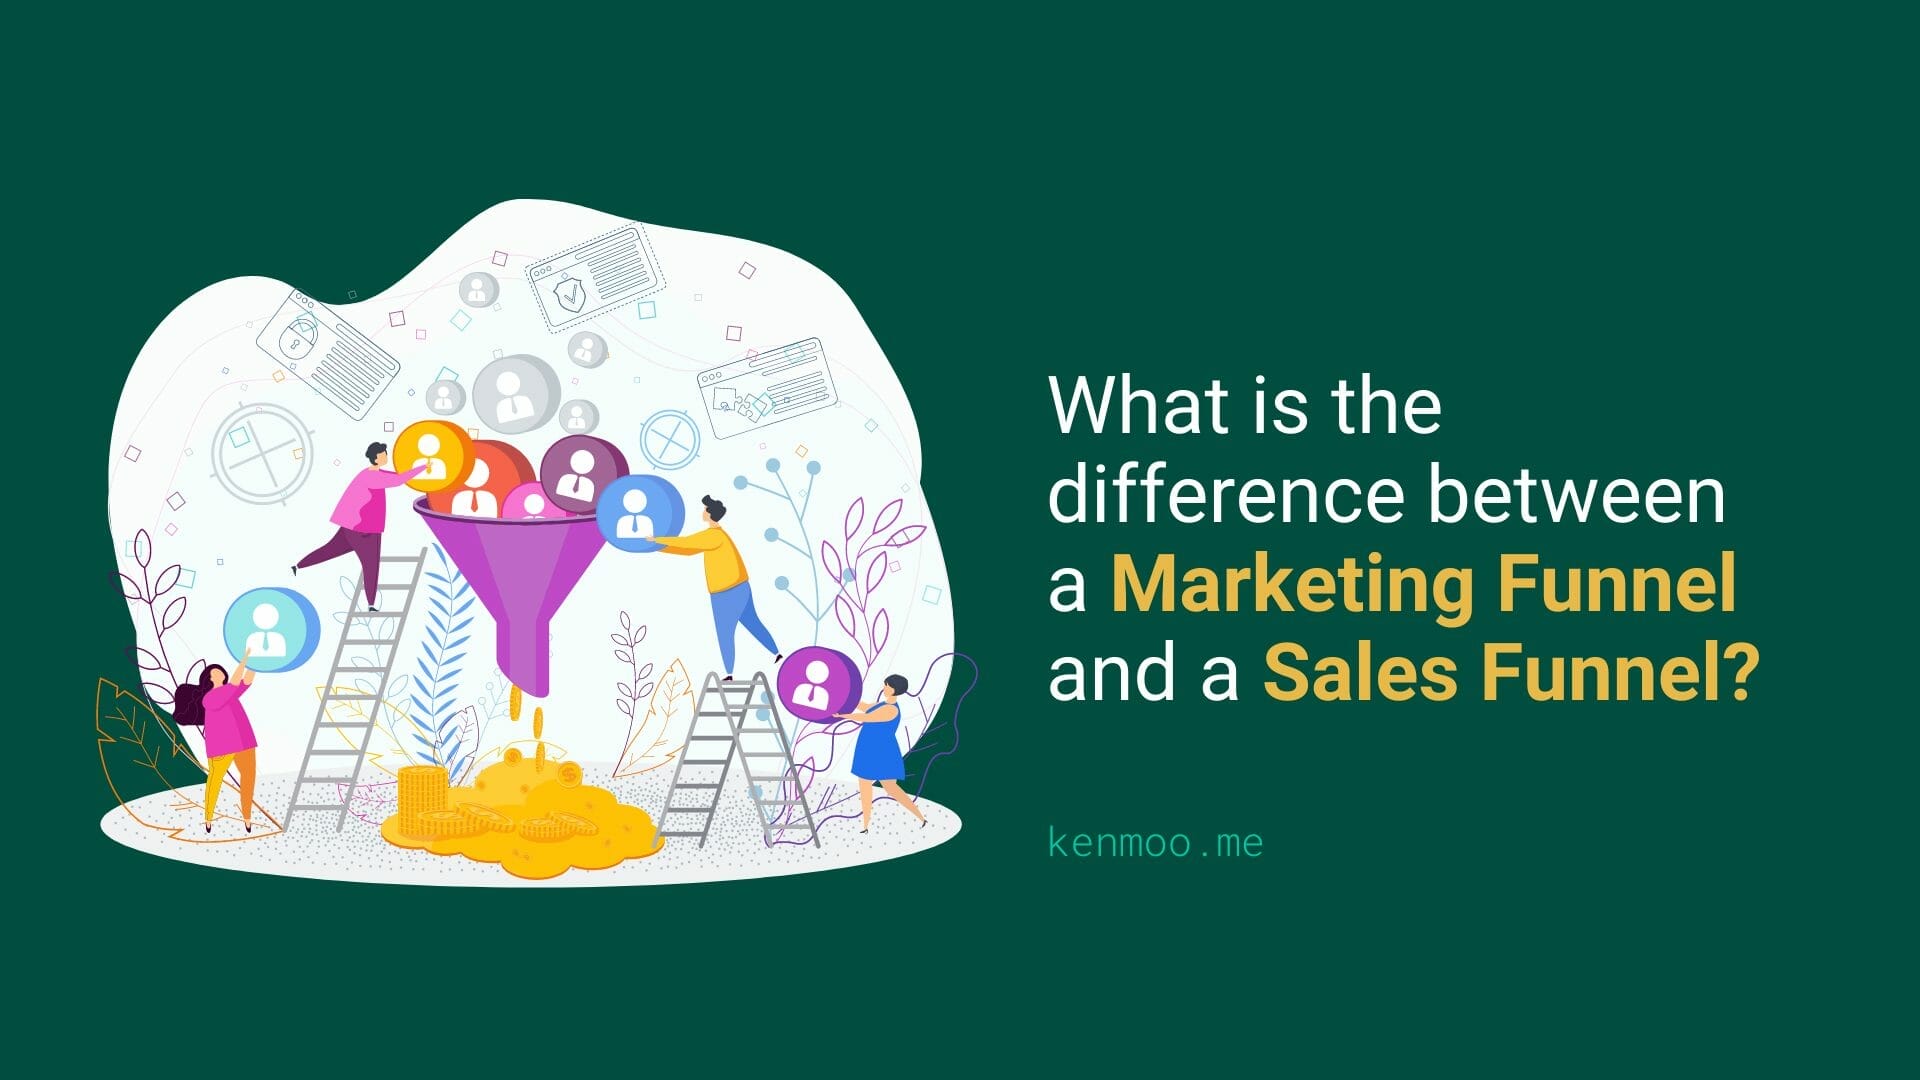 What Is the Difference Between Marketing Funnel and Sales Funnel?